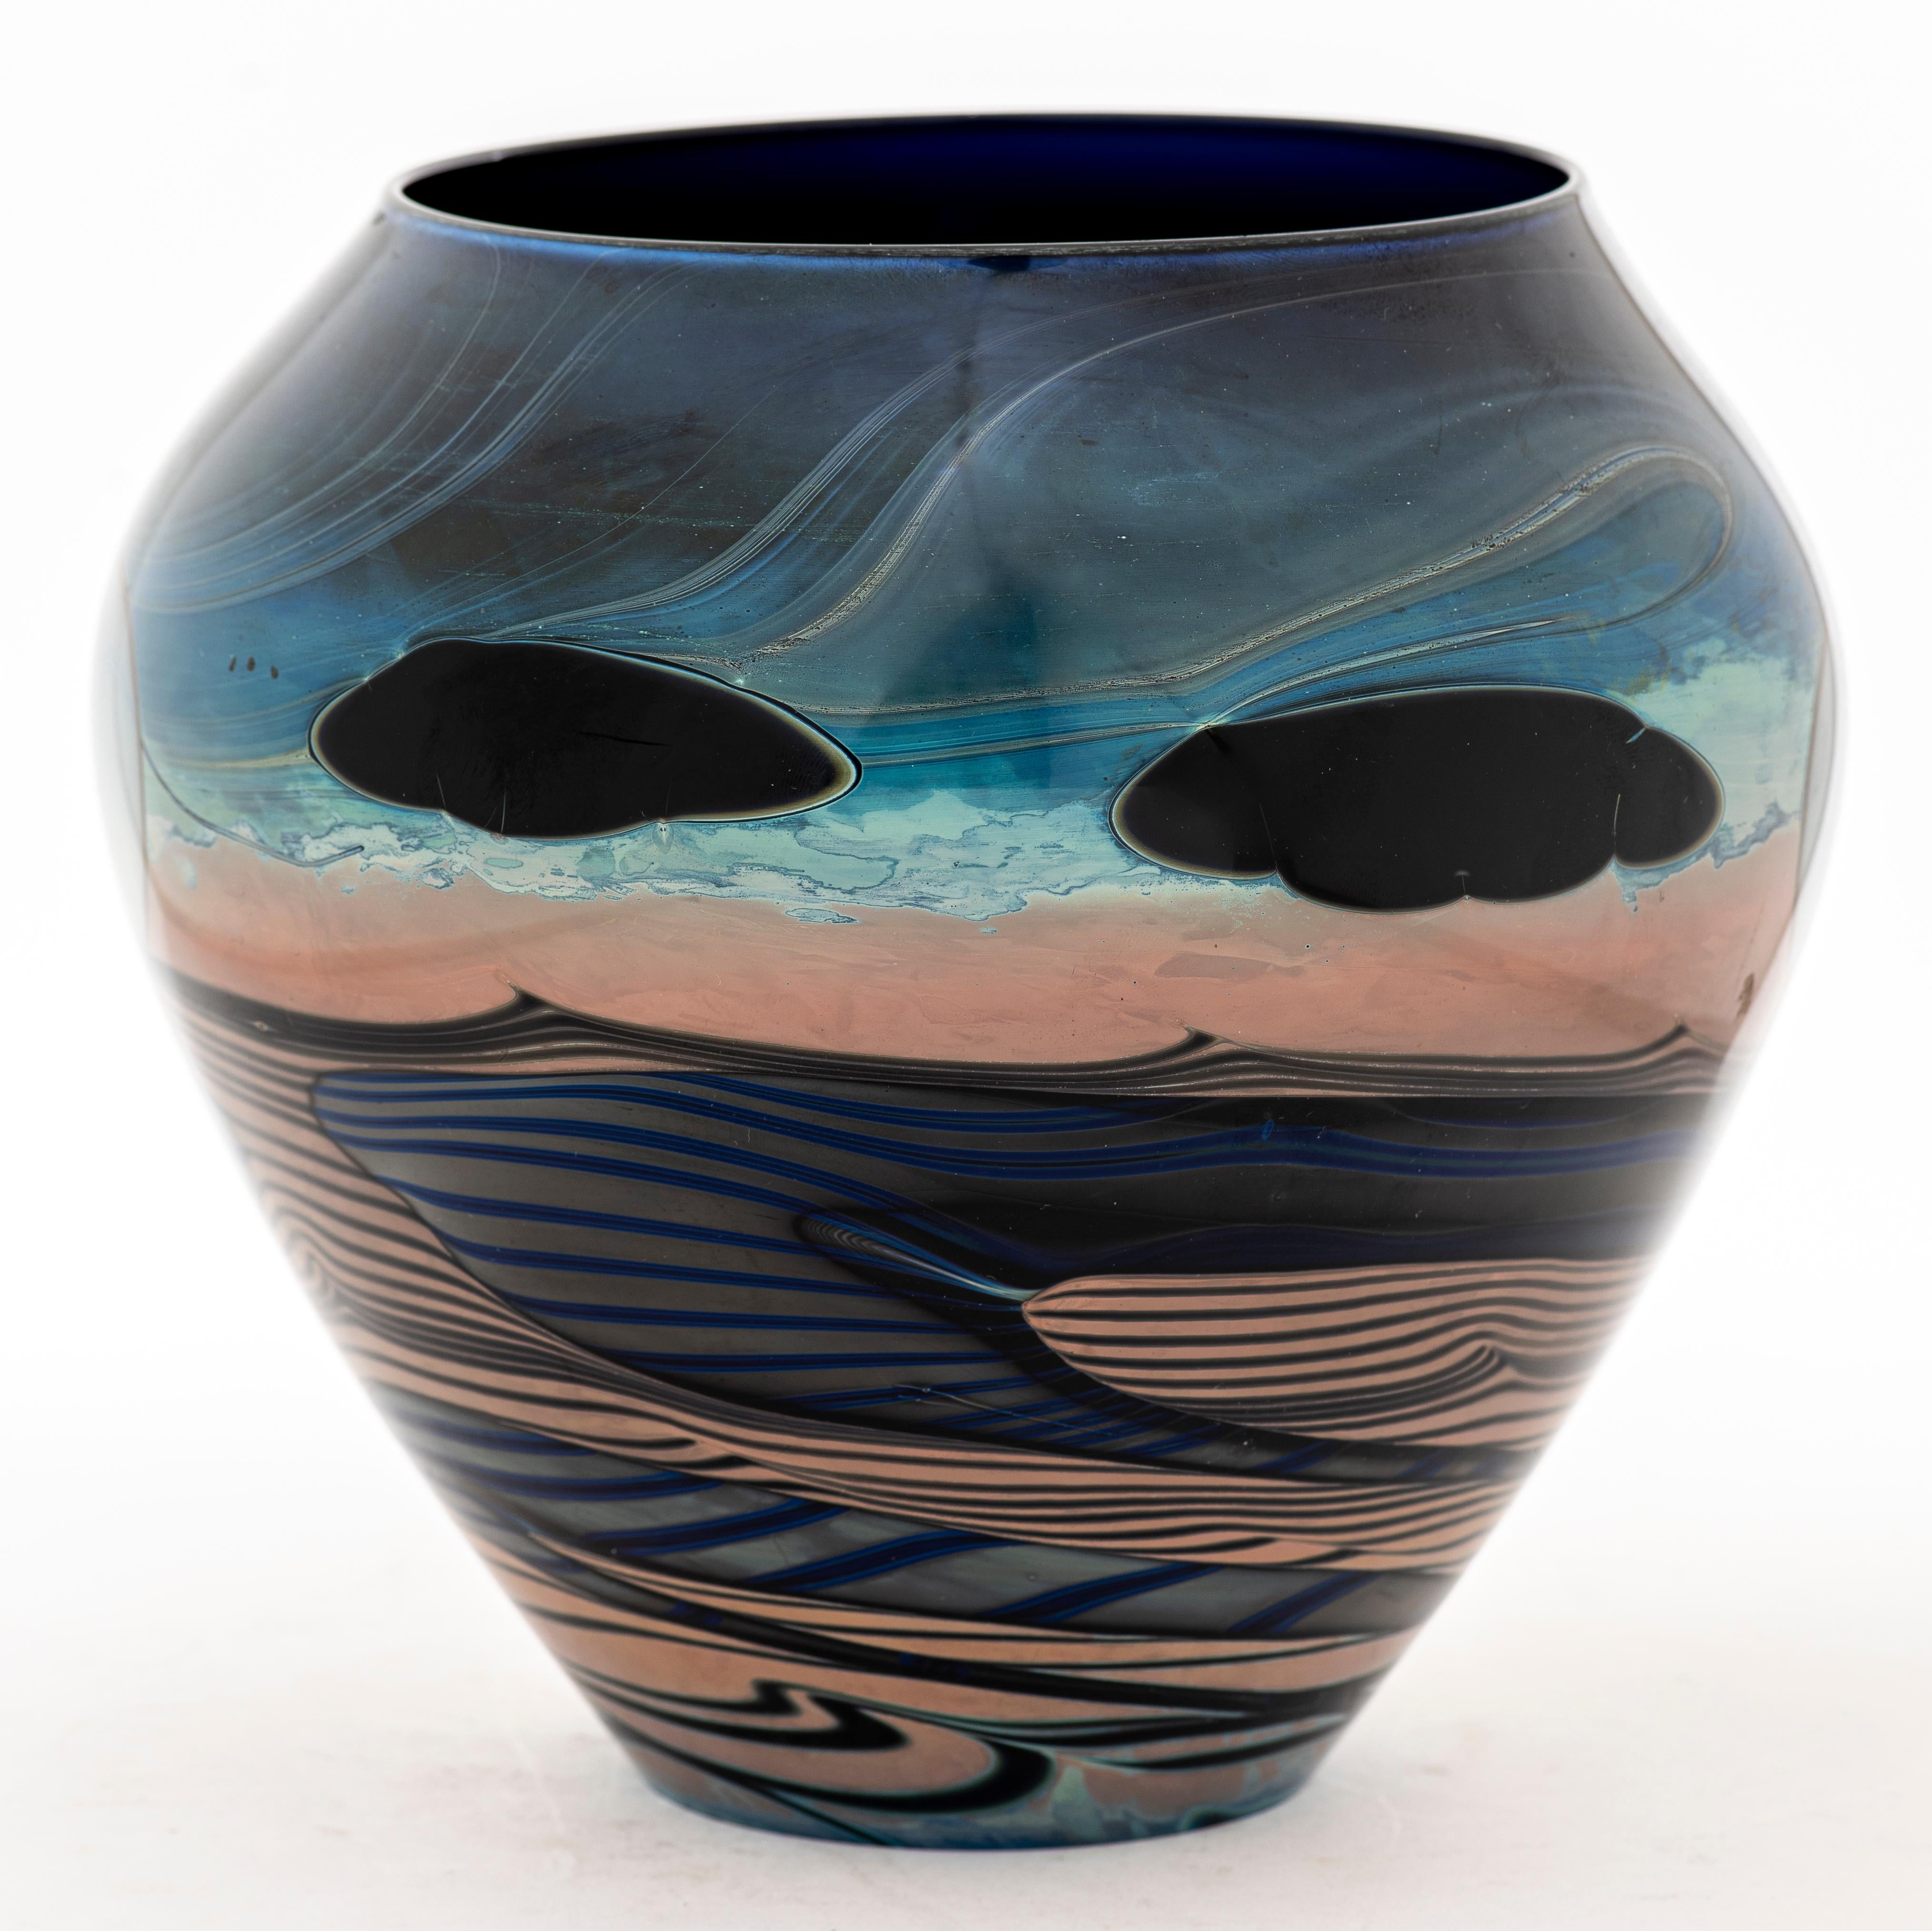 John Lewis modern art glass tapered vase from the 'moonscape' series, depicting stylized landscape. Signed on bottom 'Lewis 79-192'. Measures: 7.5